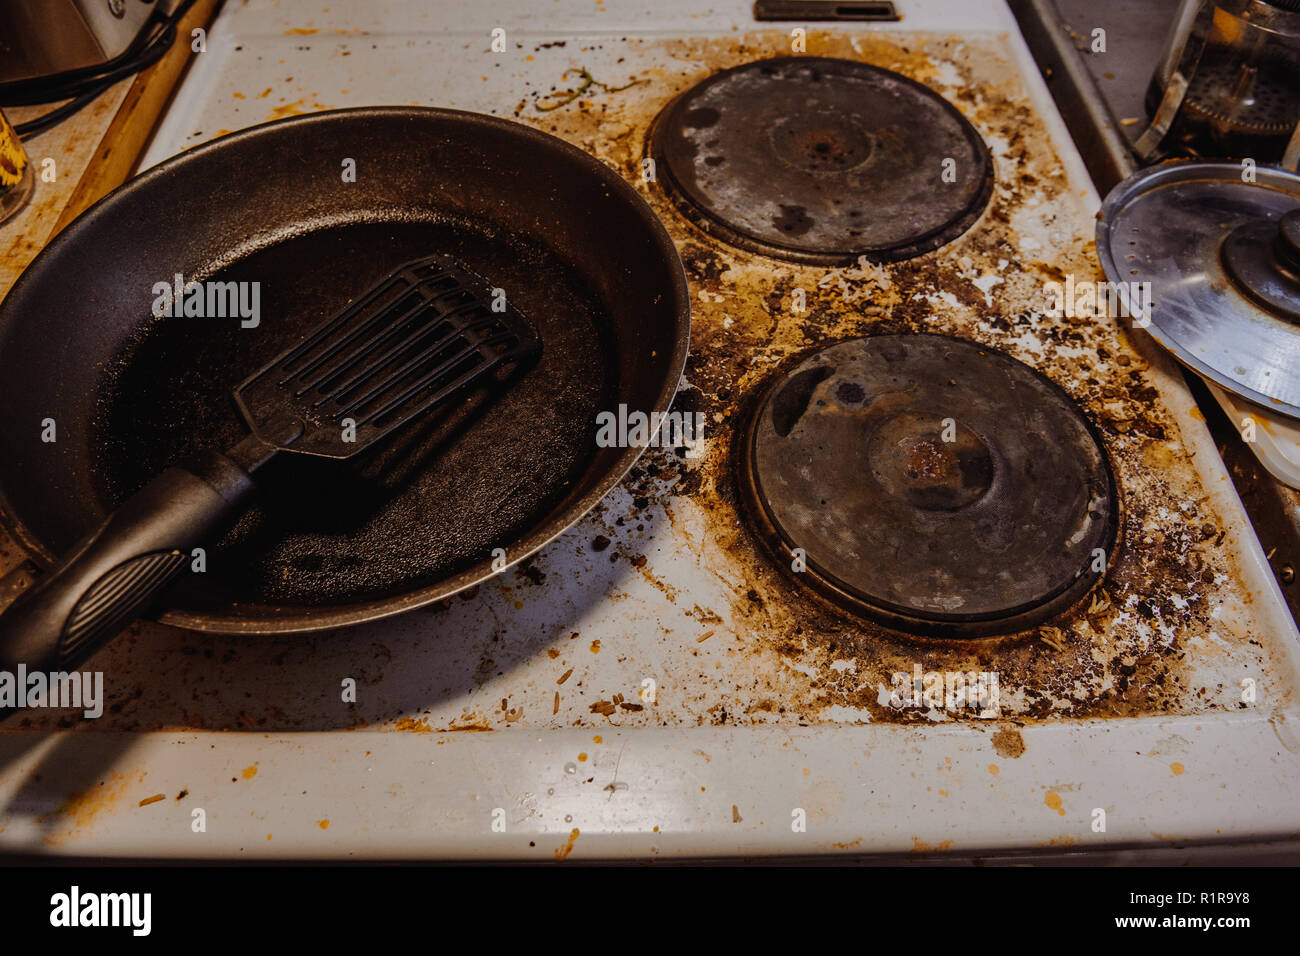 https://c8.alamy.com/comp/R1R9Y8/high-angle-view-of-dirty-stove-top-R1R9Y8.jpg